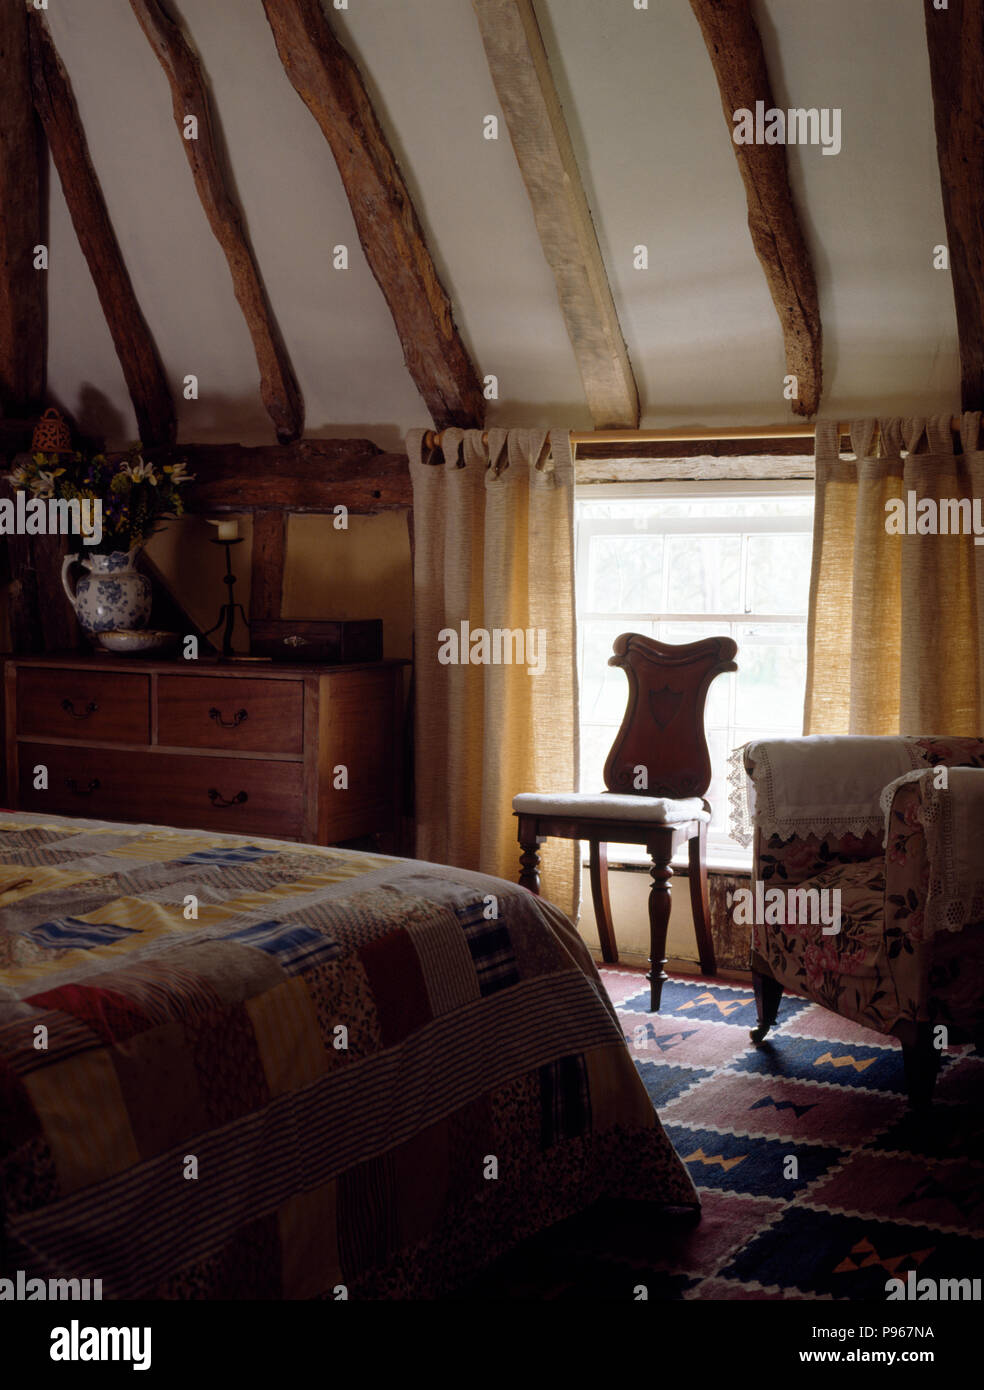 Patchwork quilt on bed in attic bedroom with antique chair in front of window with natural linen curtains Stock Photo